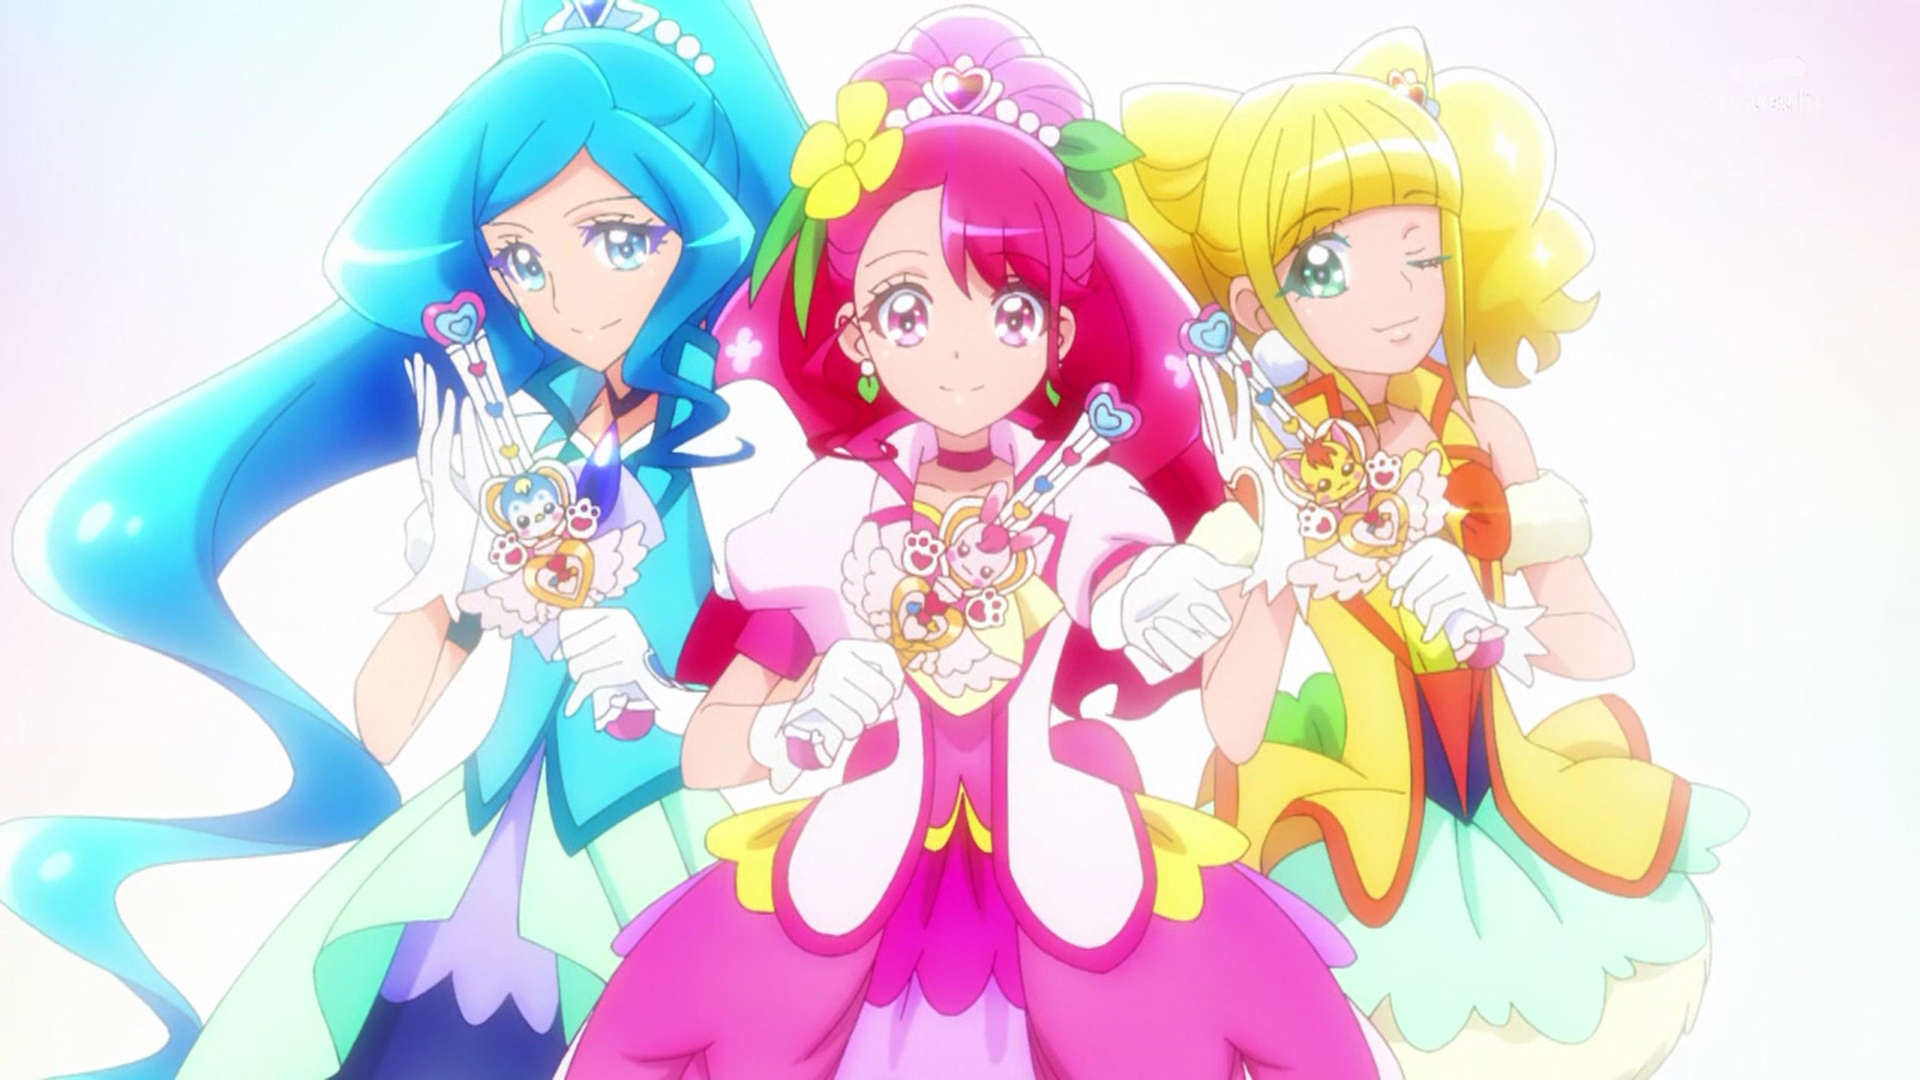 Pretty Cure Wiki is a comprehensive encyclopedia that covers the anime seri...